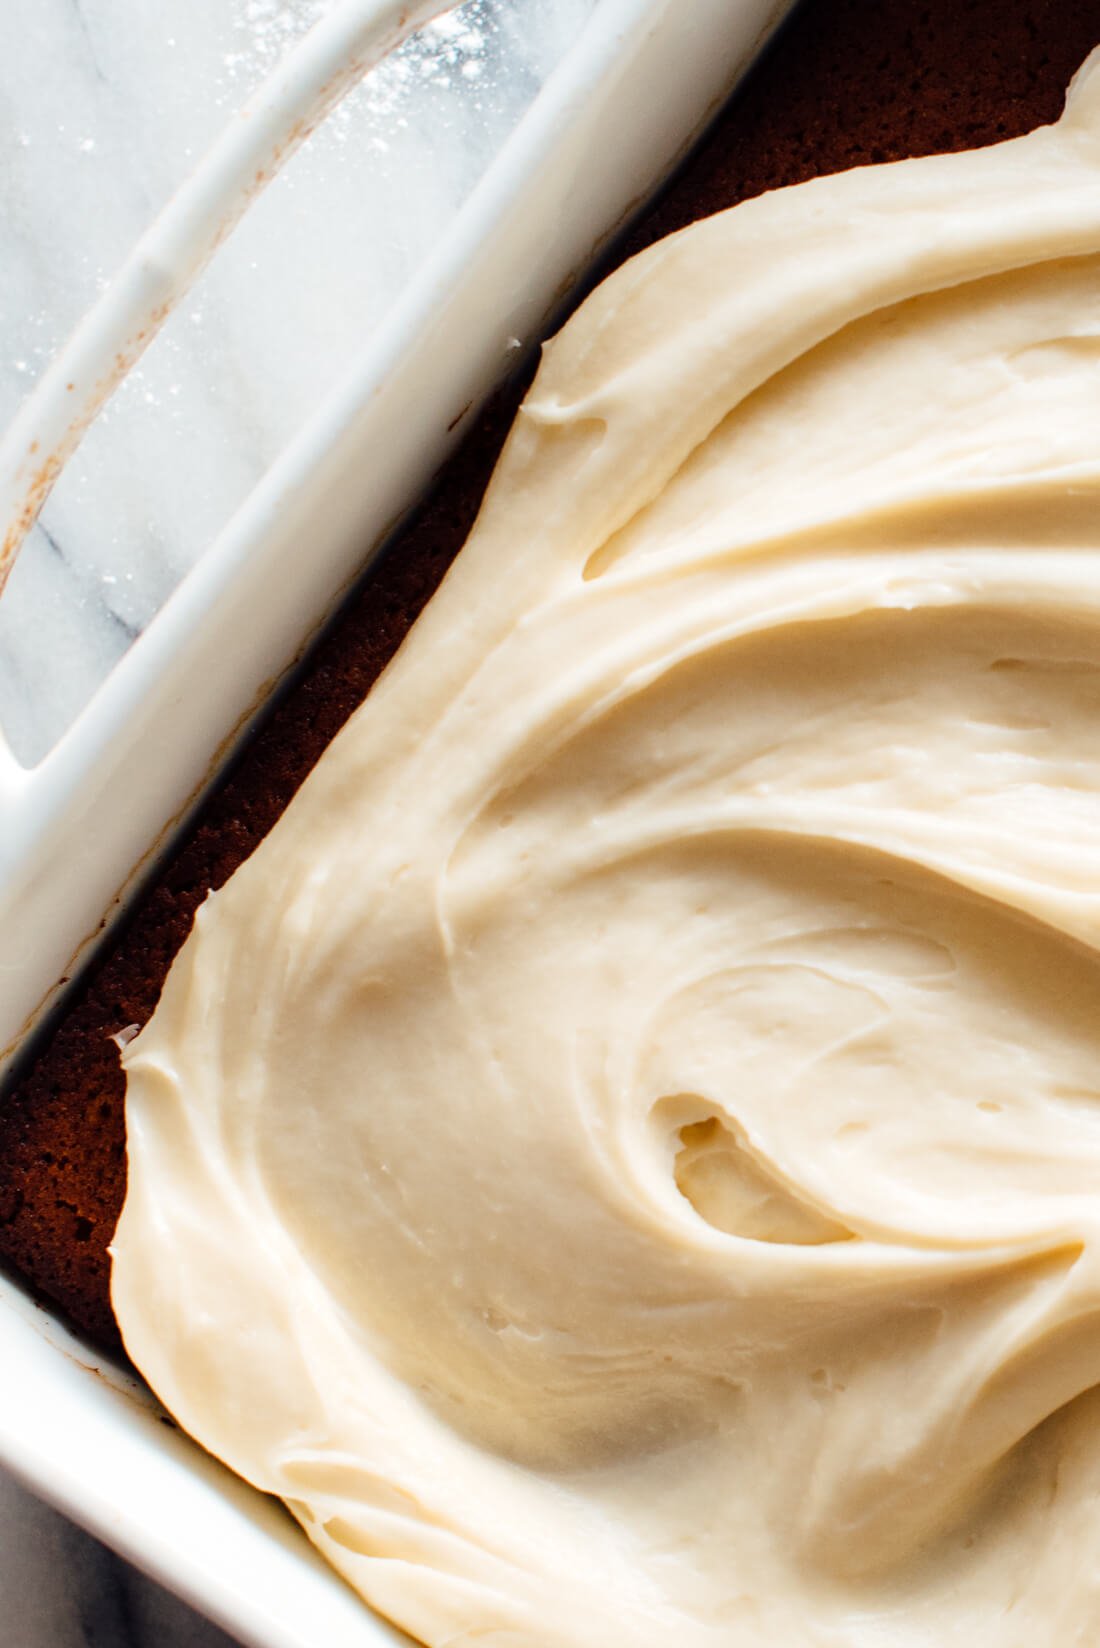 Naturally sweetened gingerbread cake with rich cream cheese frosting on top